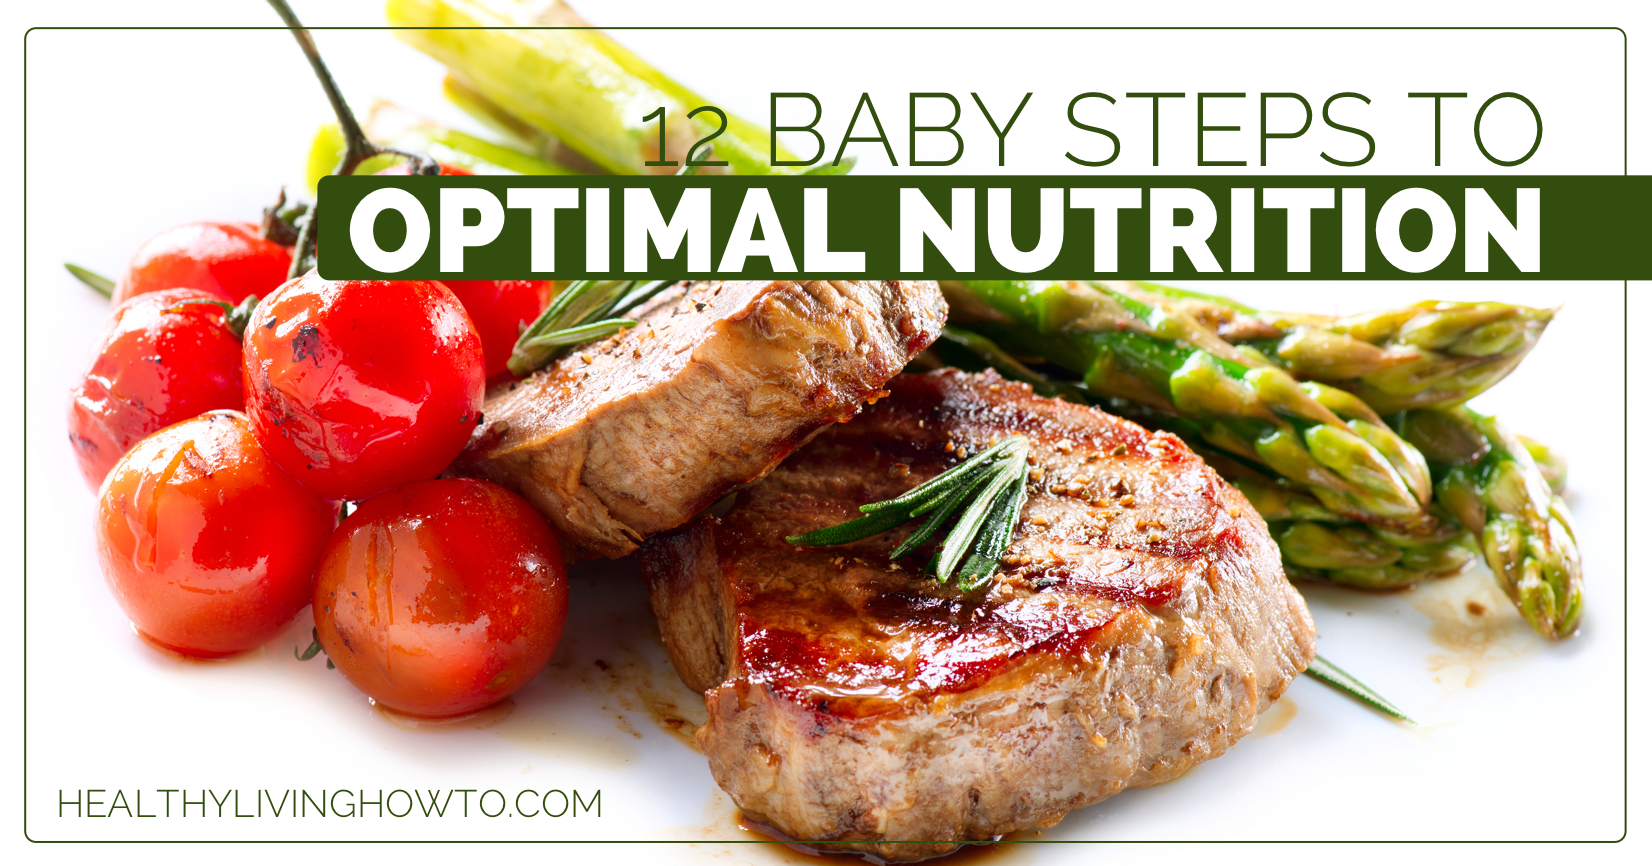 12 Baby Steps To Optimal Nutrition | healthylivinghowto.com